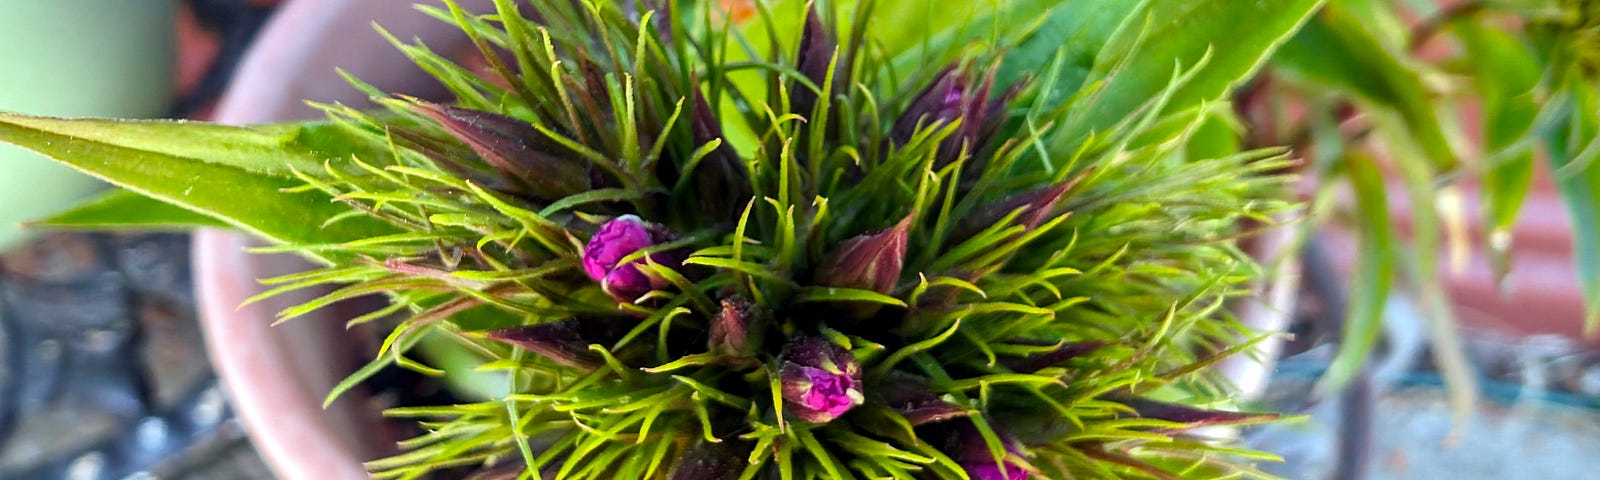 A close-up shot captures the intricate details of a spiky green plant, with small purple flowers peeking out from between its sharp leaves. The plant is set against a blurred background that suggests it might be situated in a garden or on a patio.